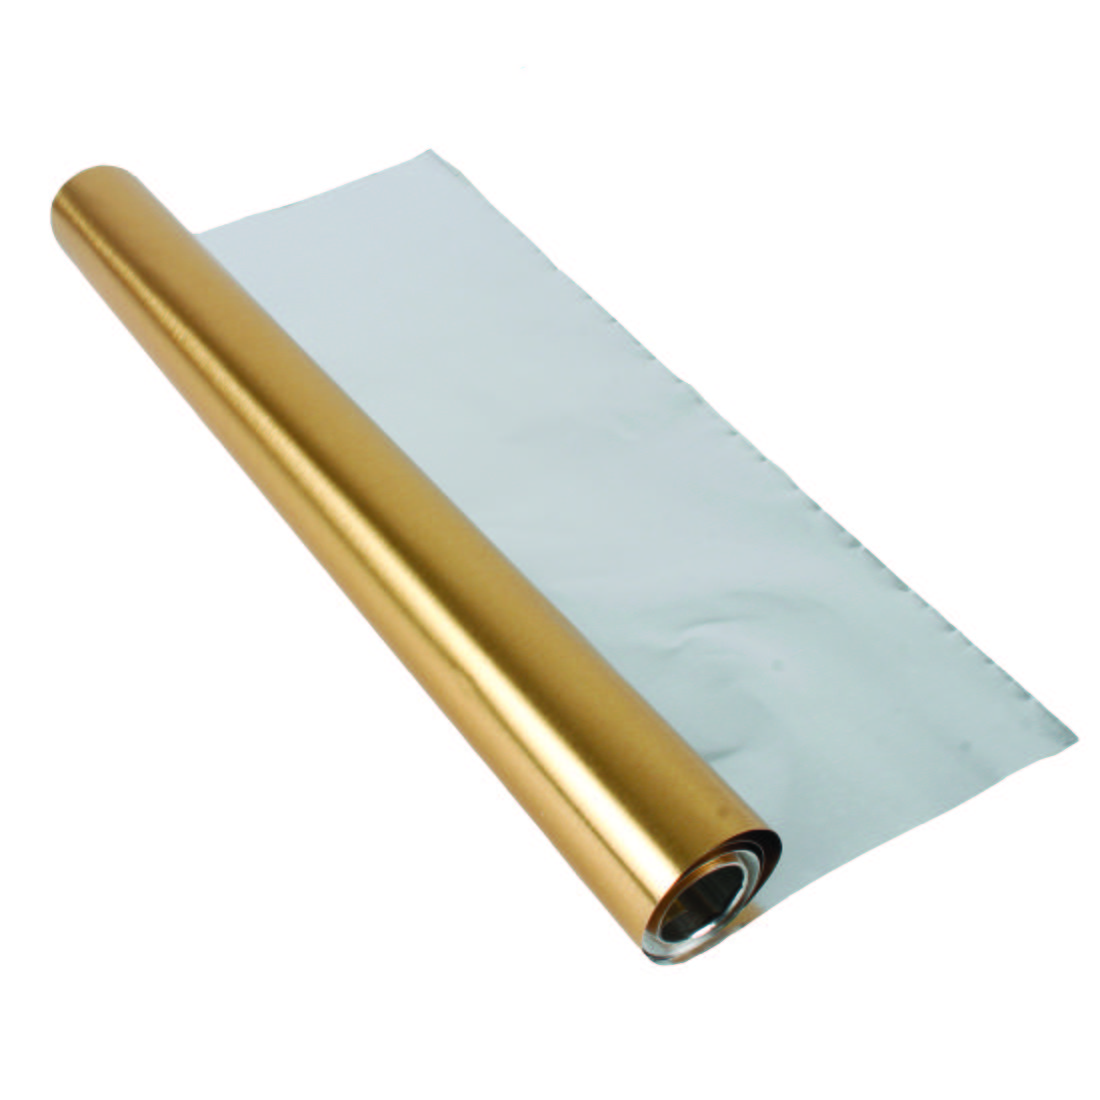 Roll of Silver/Gold 2-Tone Decorator Tooling Foil by St. Louis Crafts